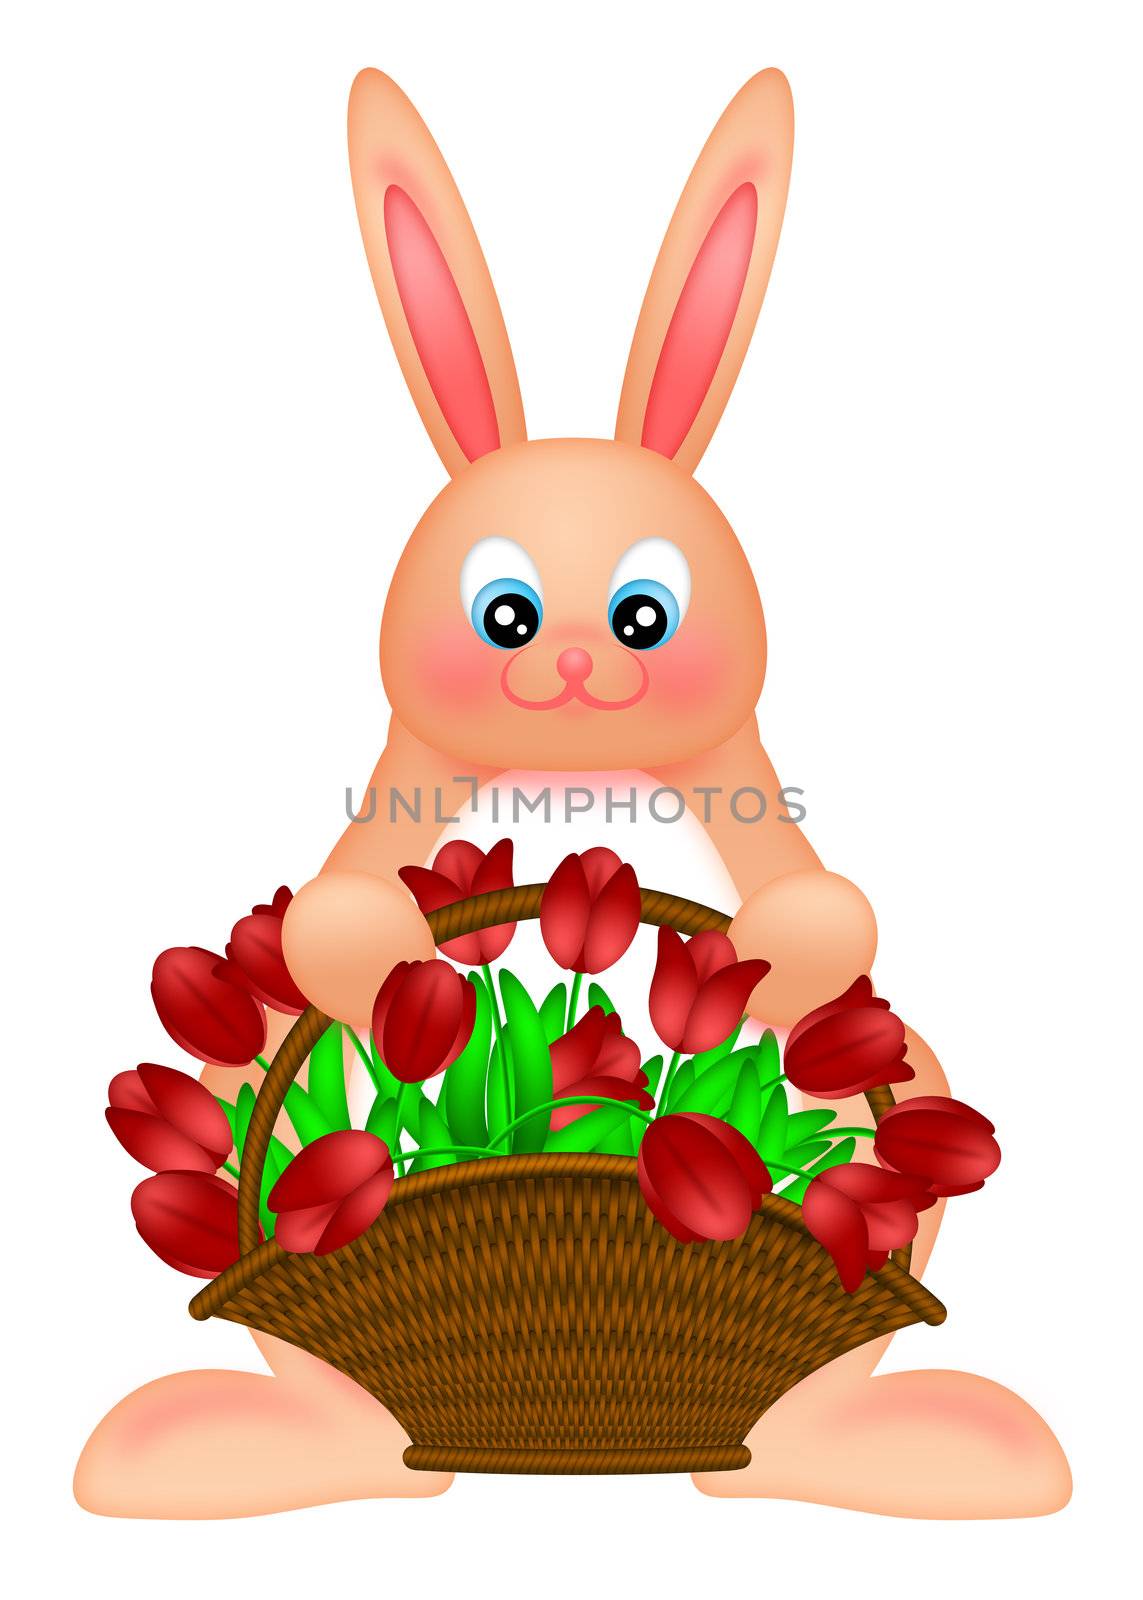 Happy Easter Bunny Rabbit Holding a Basket of Red Tulips Flowers Illustration Isolated on White Background